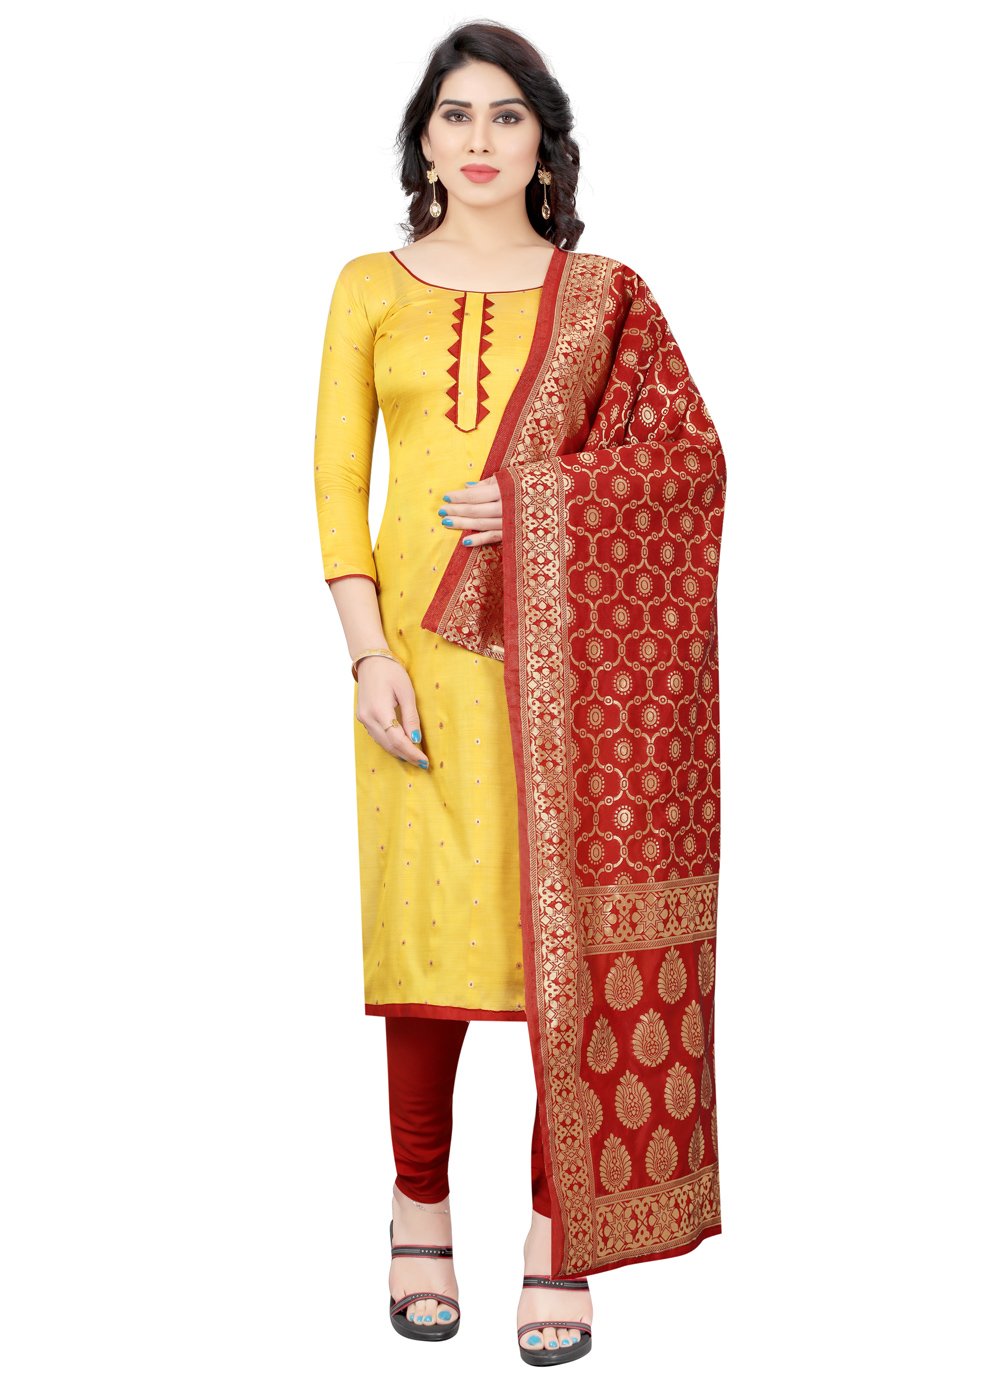 Aggregate 218+ yellow red combination suit super hot